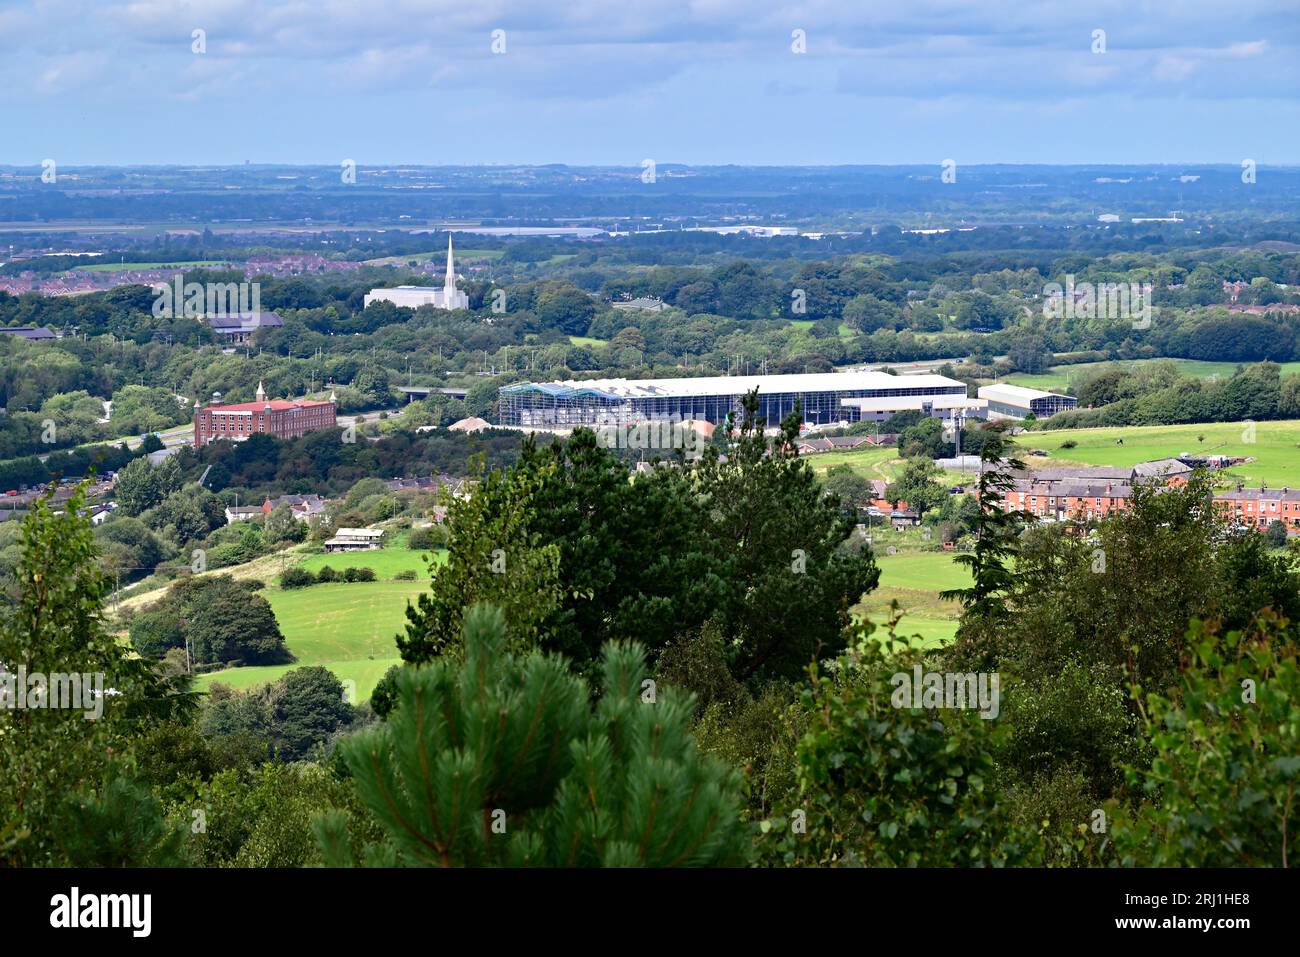 Around the UK - Botany Bay area of Chorley as viewed from Healy Nab Stock Photo